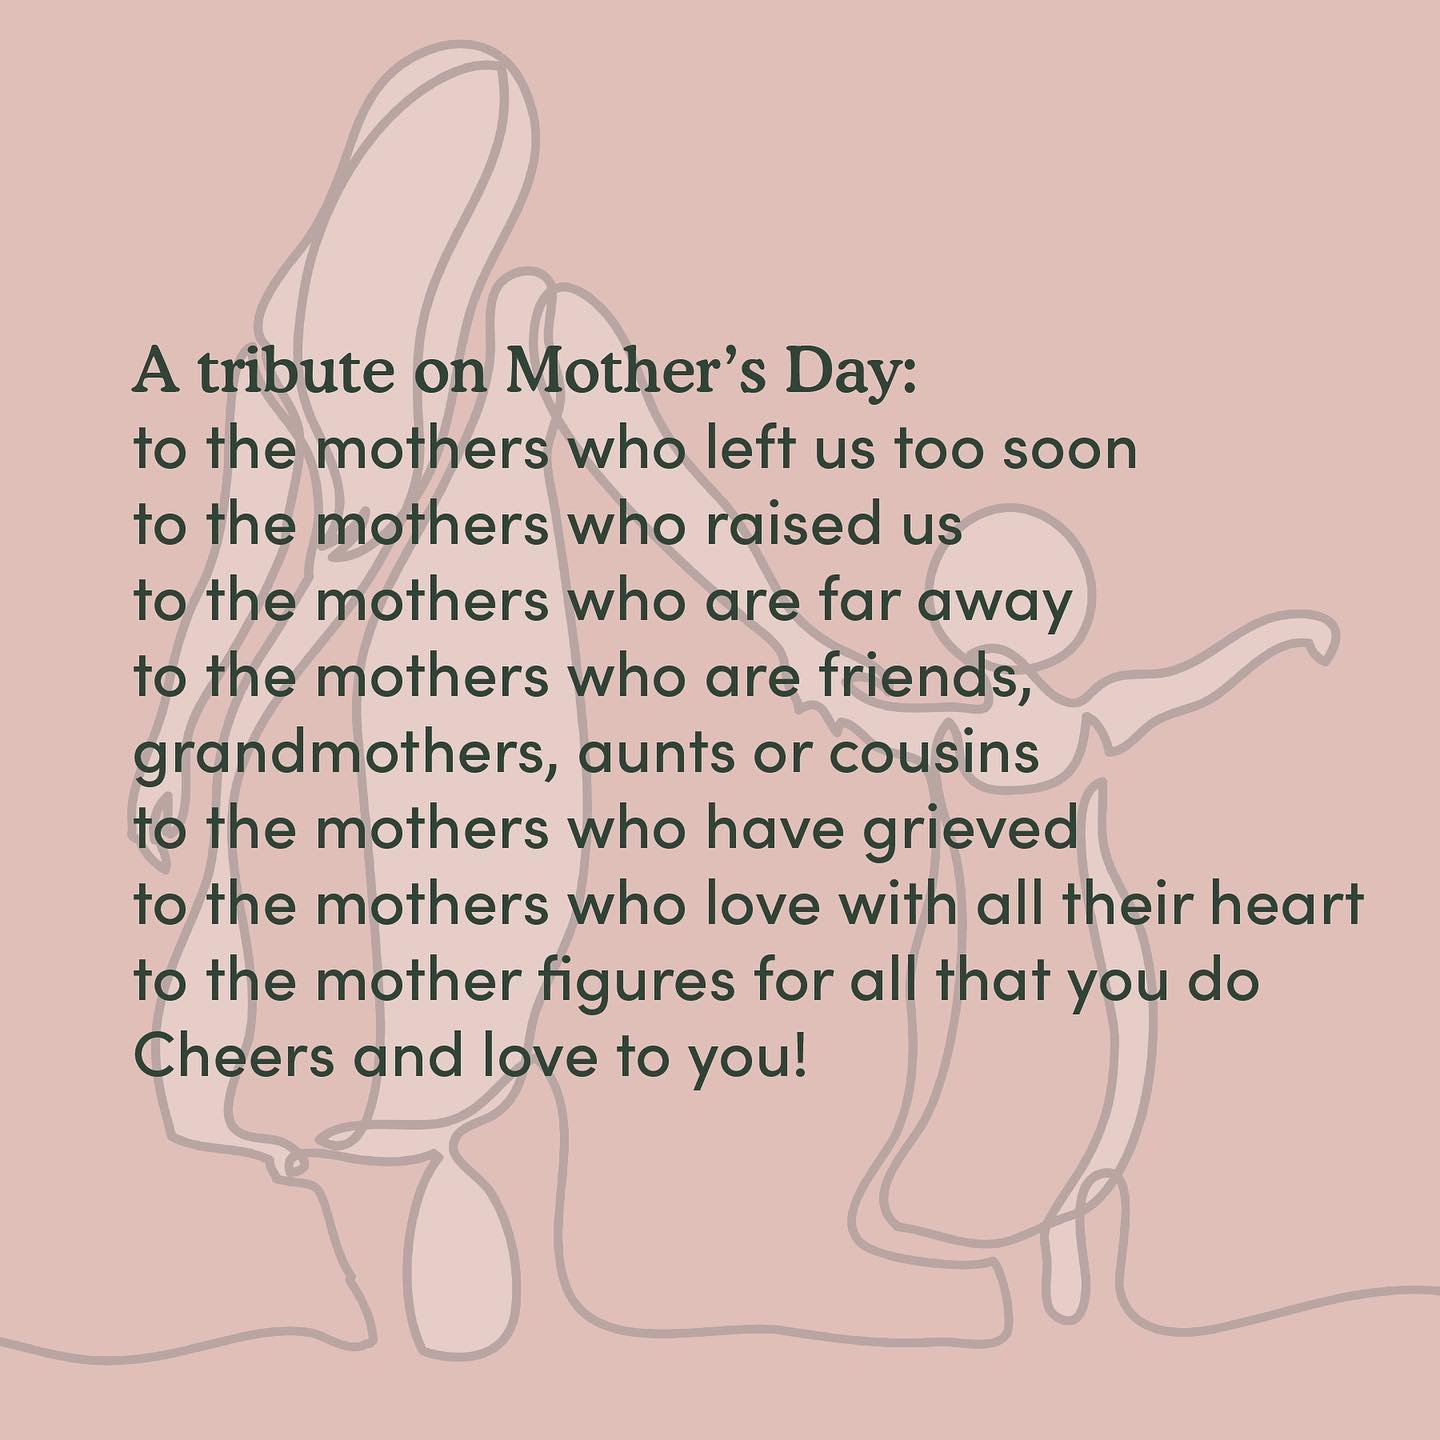 🌸Happy Mothers Day!🌸

For those that have lost, take time for yourself today. We are here for you. Celebrate the mothers and the love they bring to our lives! 

#mothers #motherslove #mom